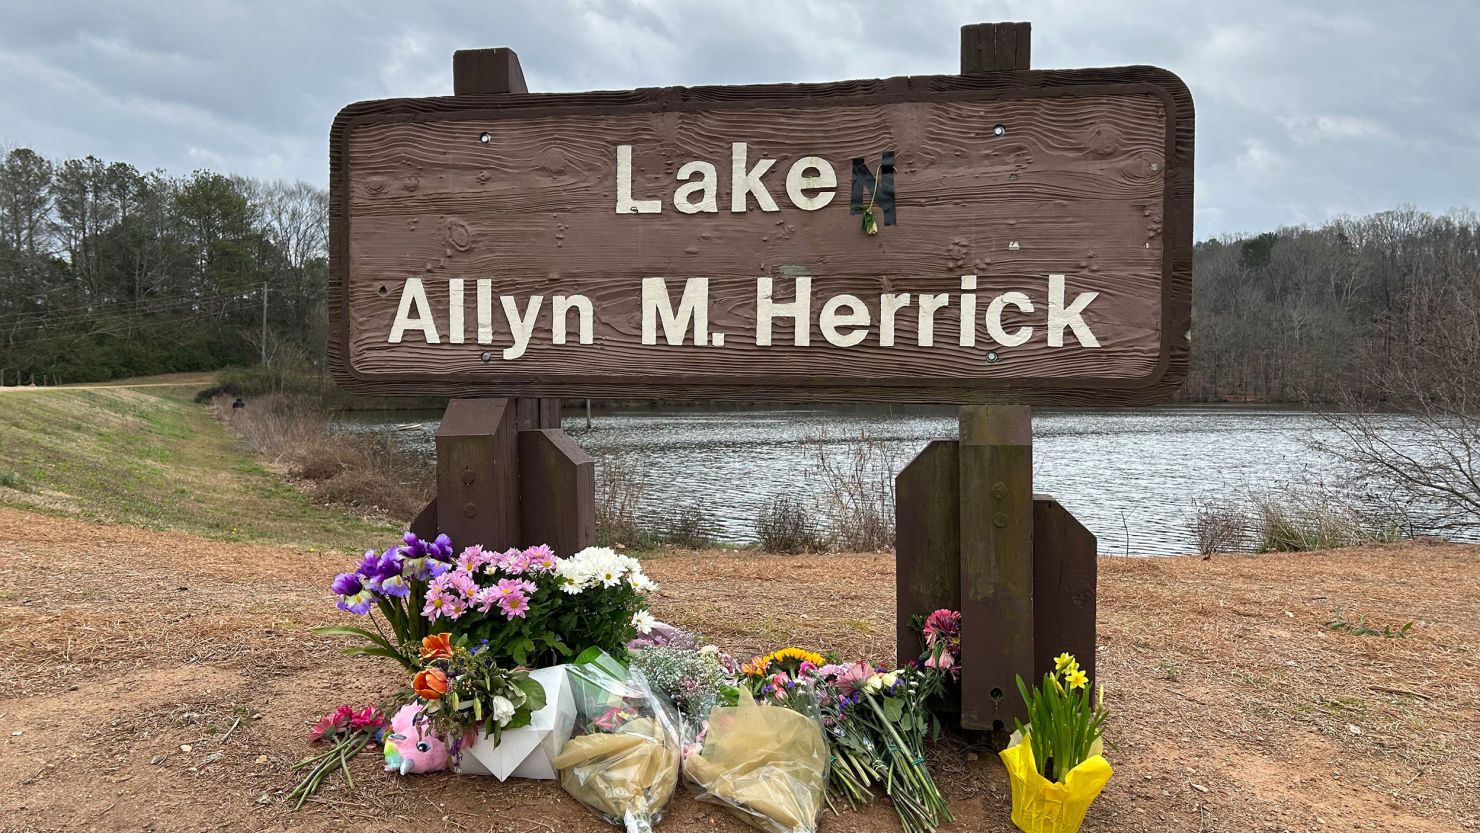 A makeshift memorial is set up for Laken Riley near where she often ran in Athens, Georgia. Riley was attacked and killed last month while running.